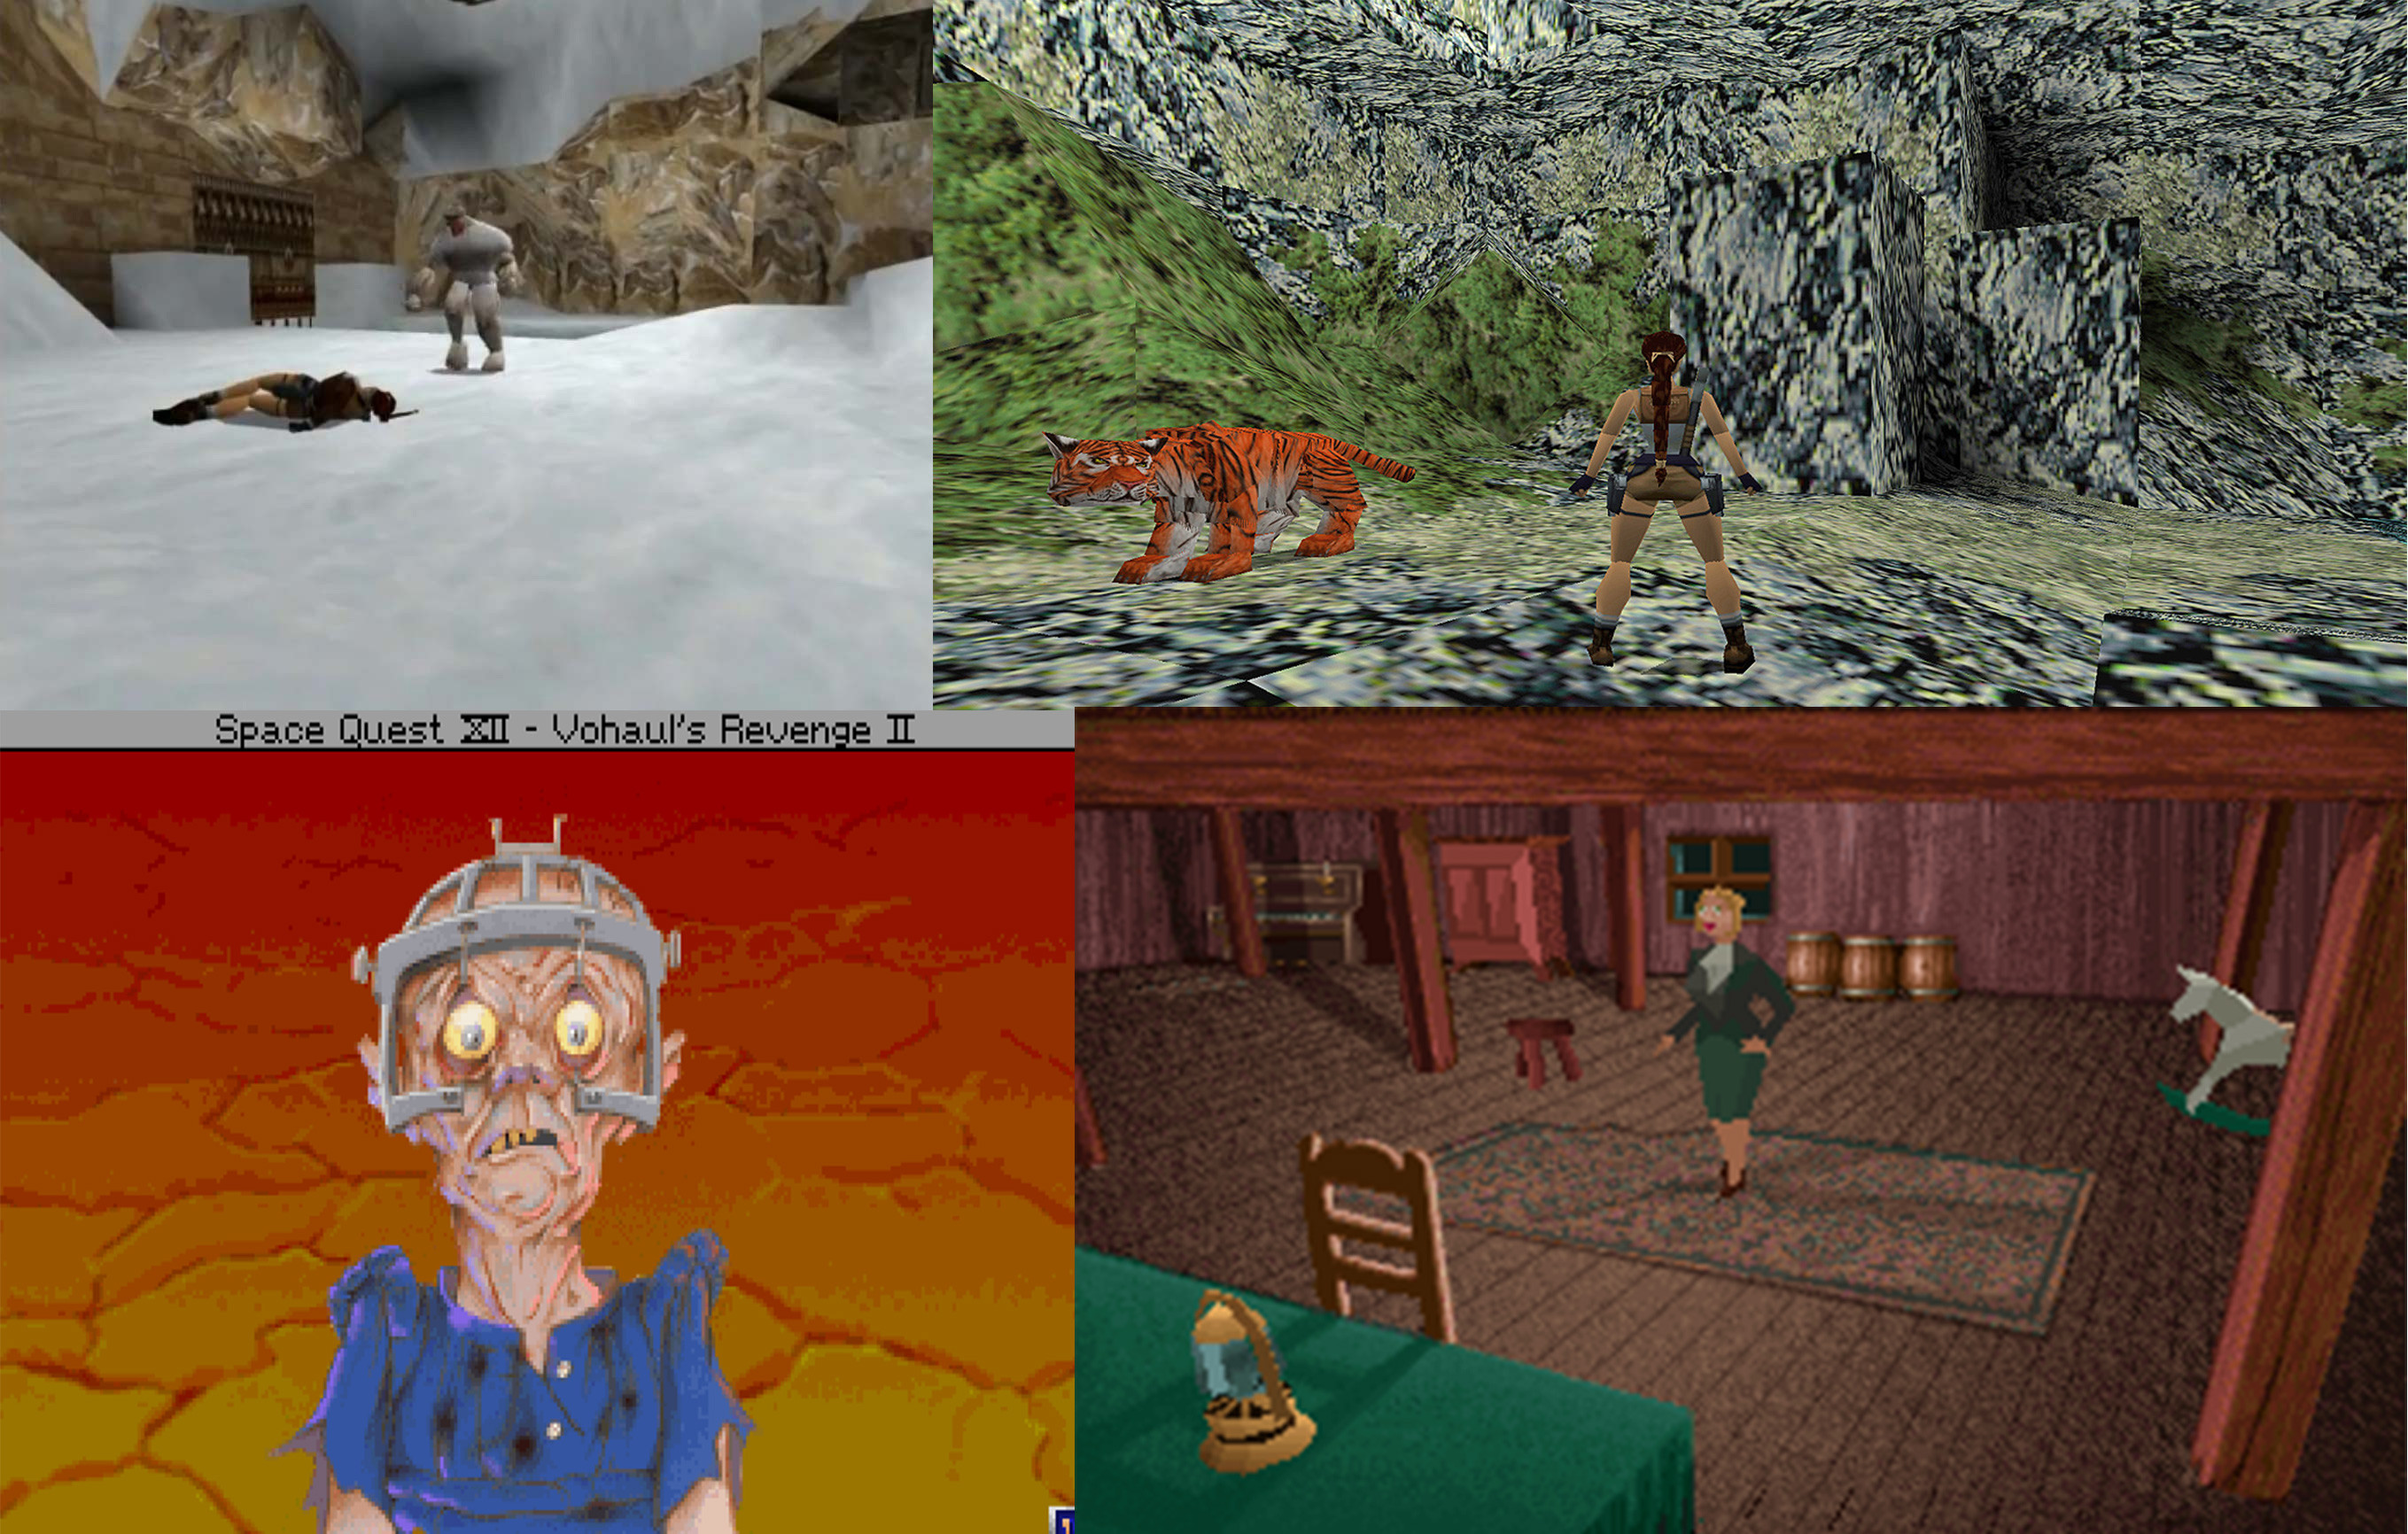 A collection of screenshots. Old school video game terrors: Tomb Raider Yetis, Tomb Raider’s Great Wall level, the sad zombie in Space Quest XII, and Alone In the Dark (original).